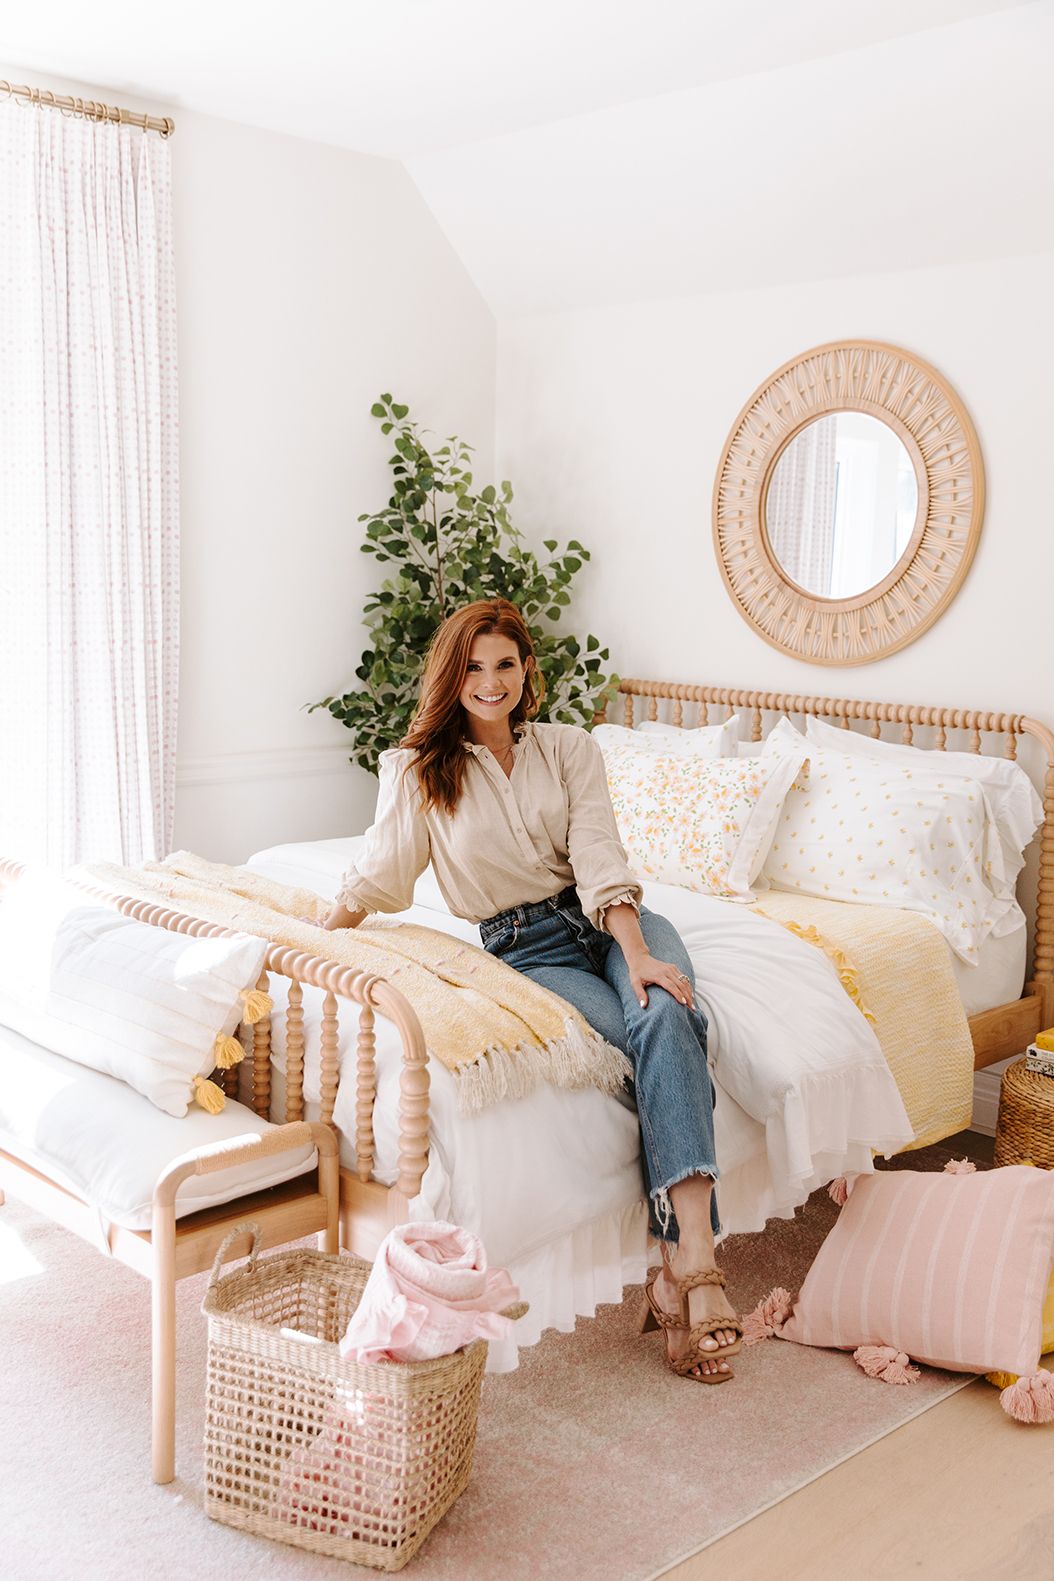 joanna garcia swisher sitting on spindle frame bed with yellow and white linens with basket holding pink blanket and pink fringe pillow at her feet